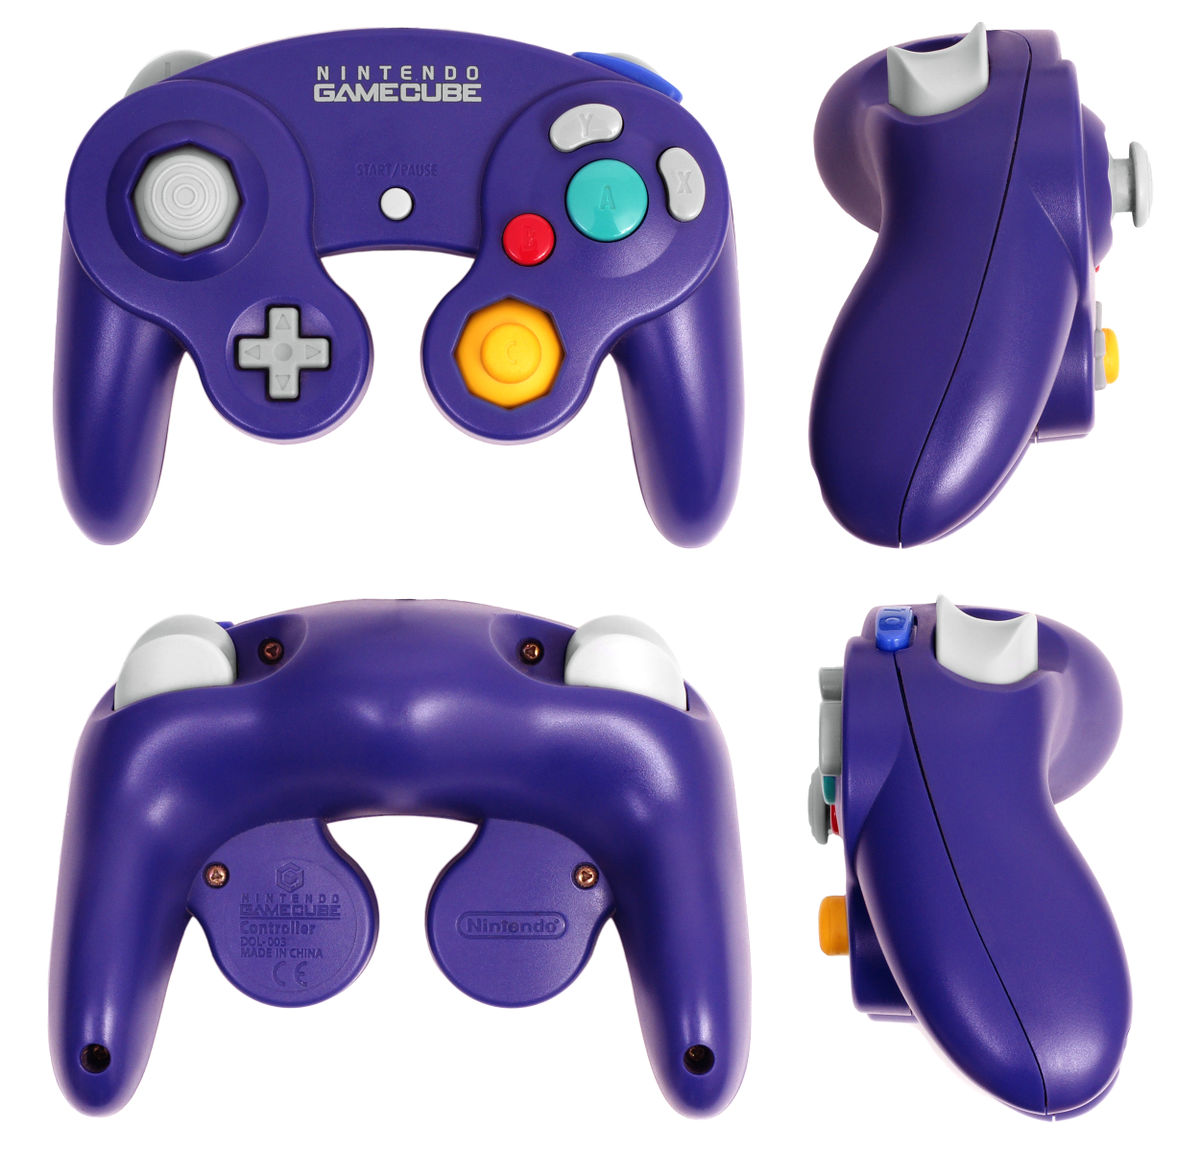 where can i buy gamecube controllers